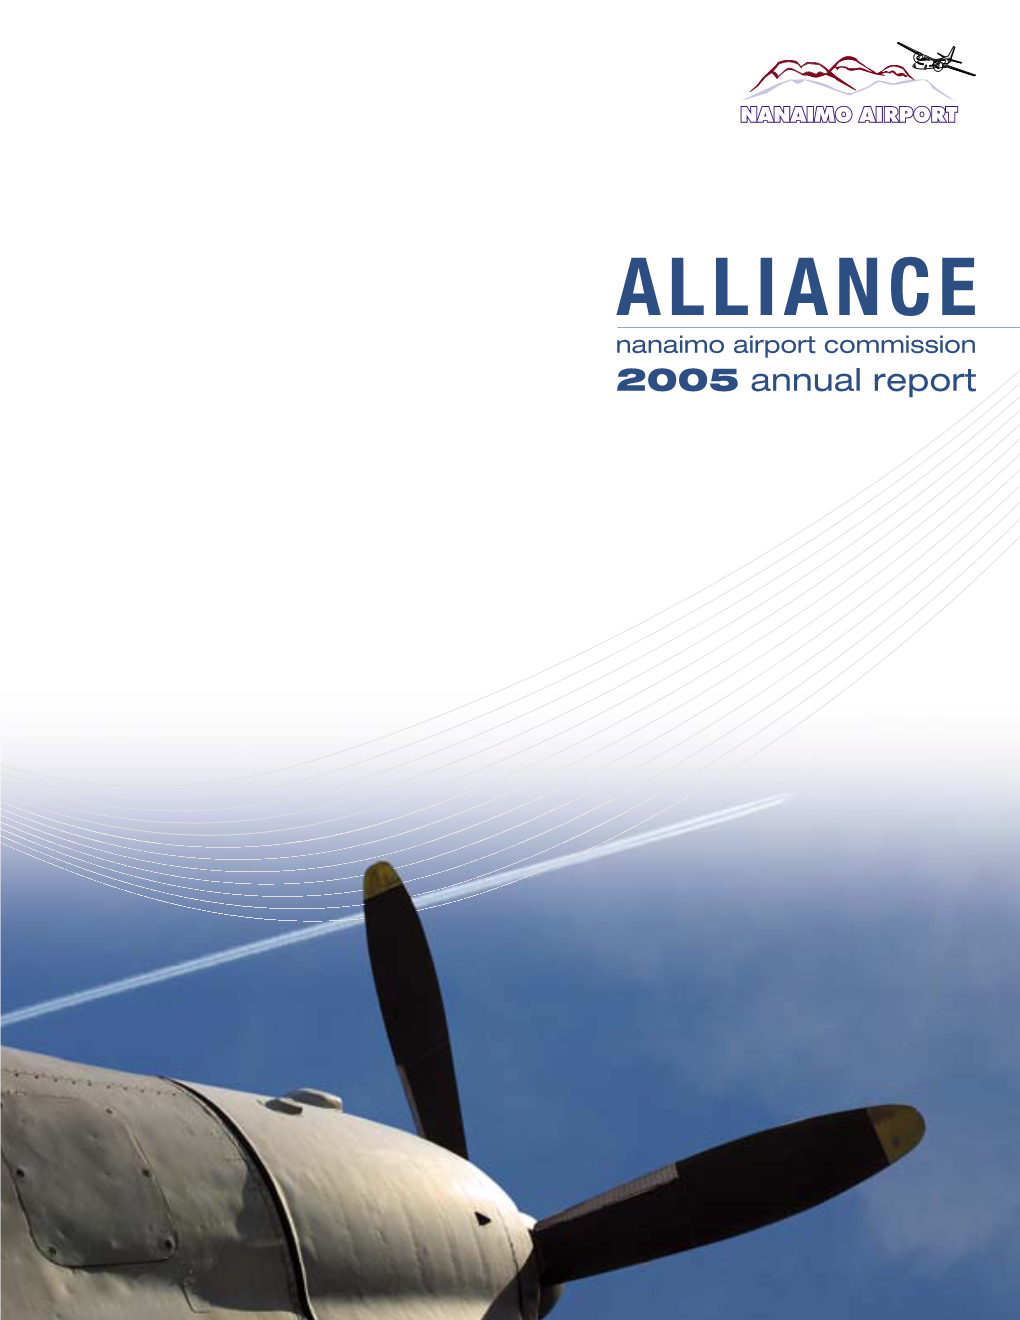 ALLIANCE Nanaimo Airport Commission 2005 Annual Report Mission Statement